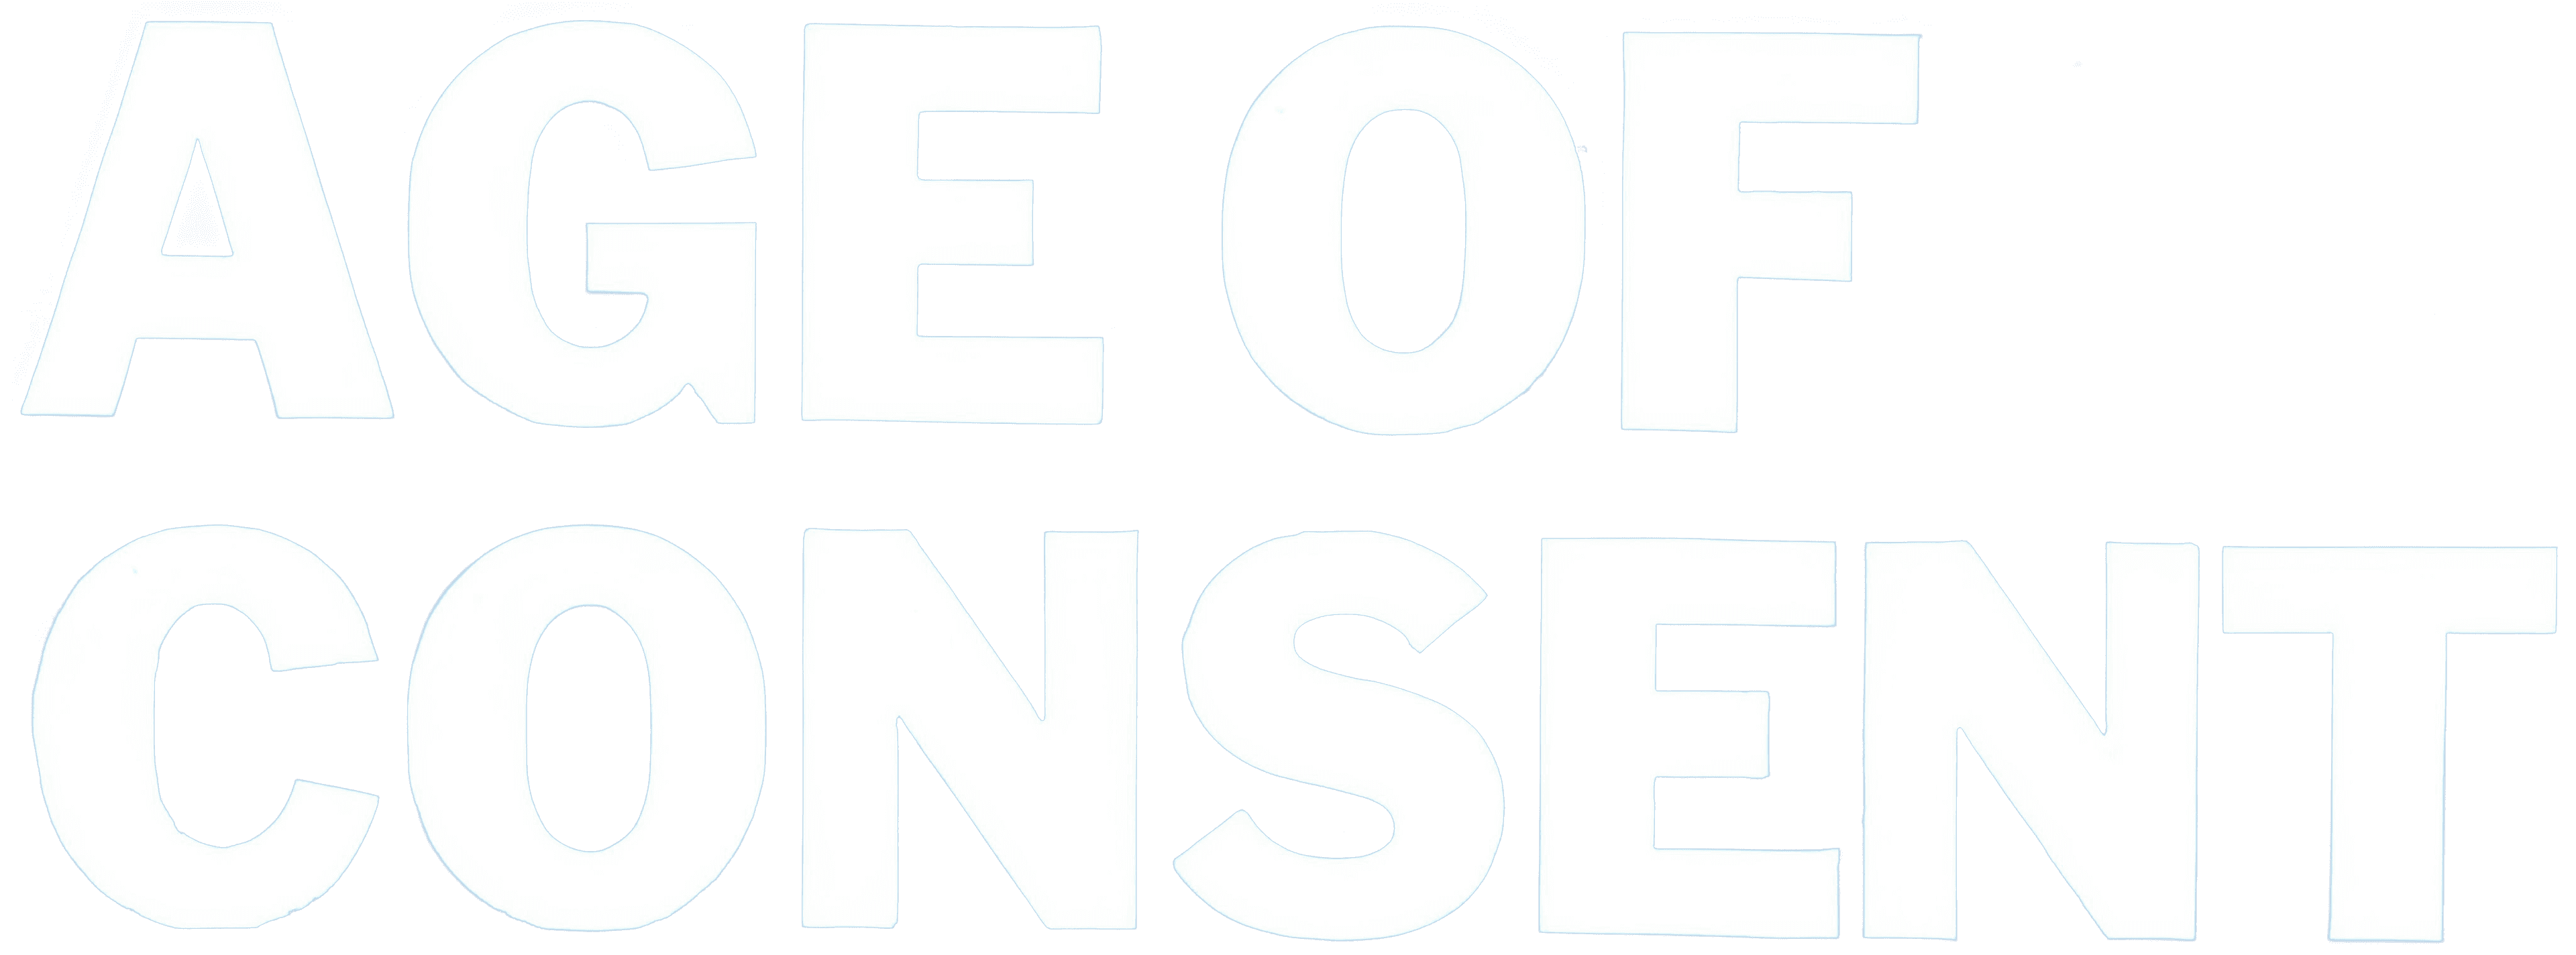 Age of Consent logo